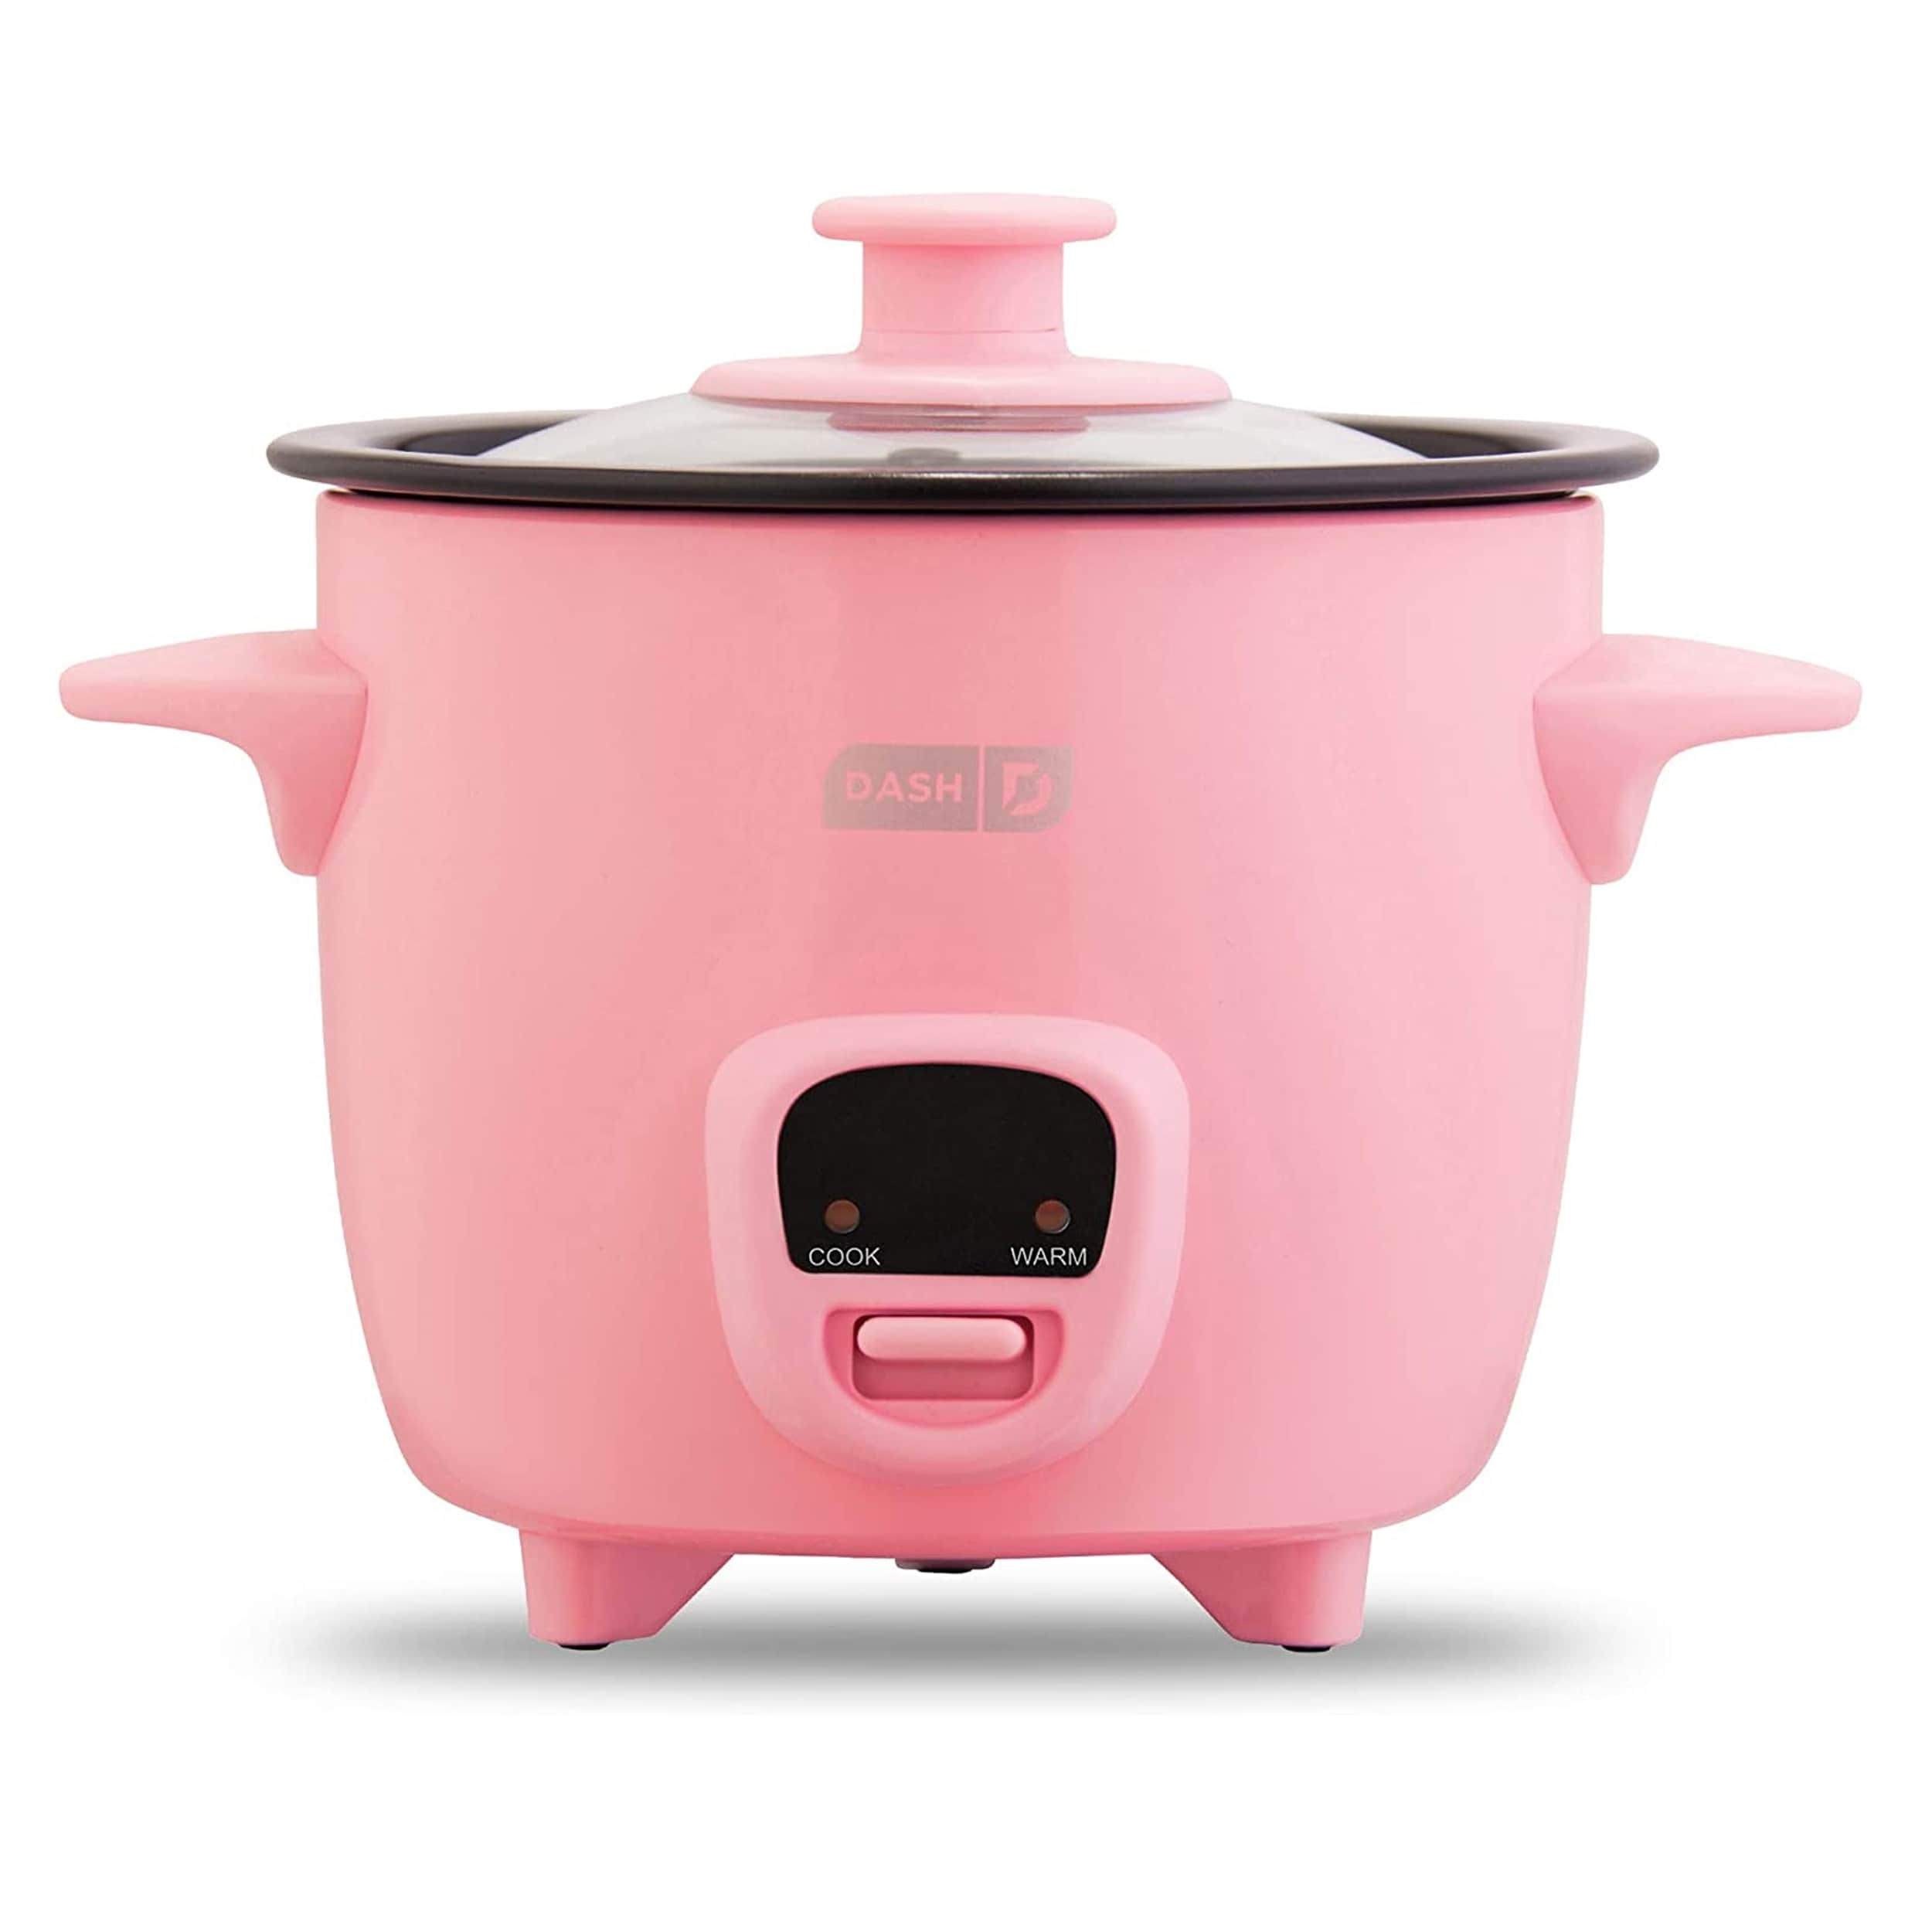 https://ak1.ostkcdn.com/images/products/is/images/direct/e28f8e19aa3c39f5c2794ab720d8d3536a0dcbdc/Dash-Mini-16-Ounce-Rice-Cooker-in-Pink-with-Keep-Warm-Setting.jpg